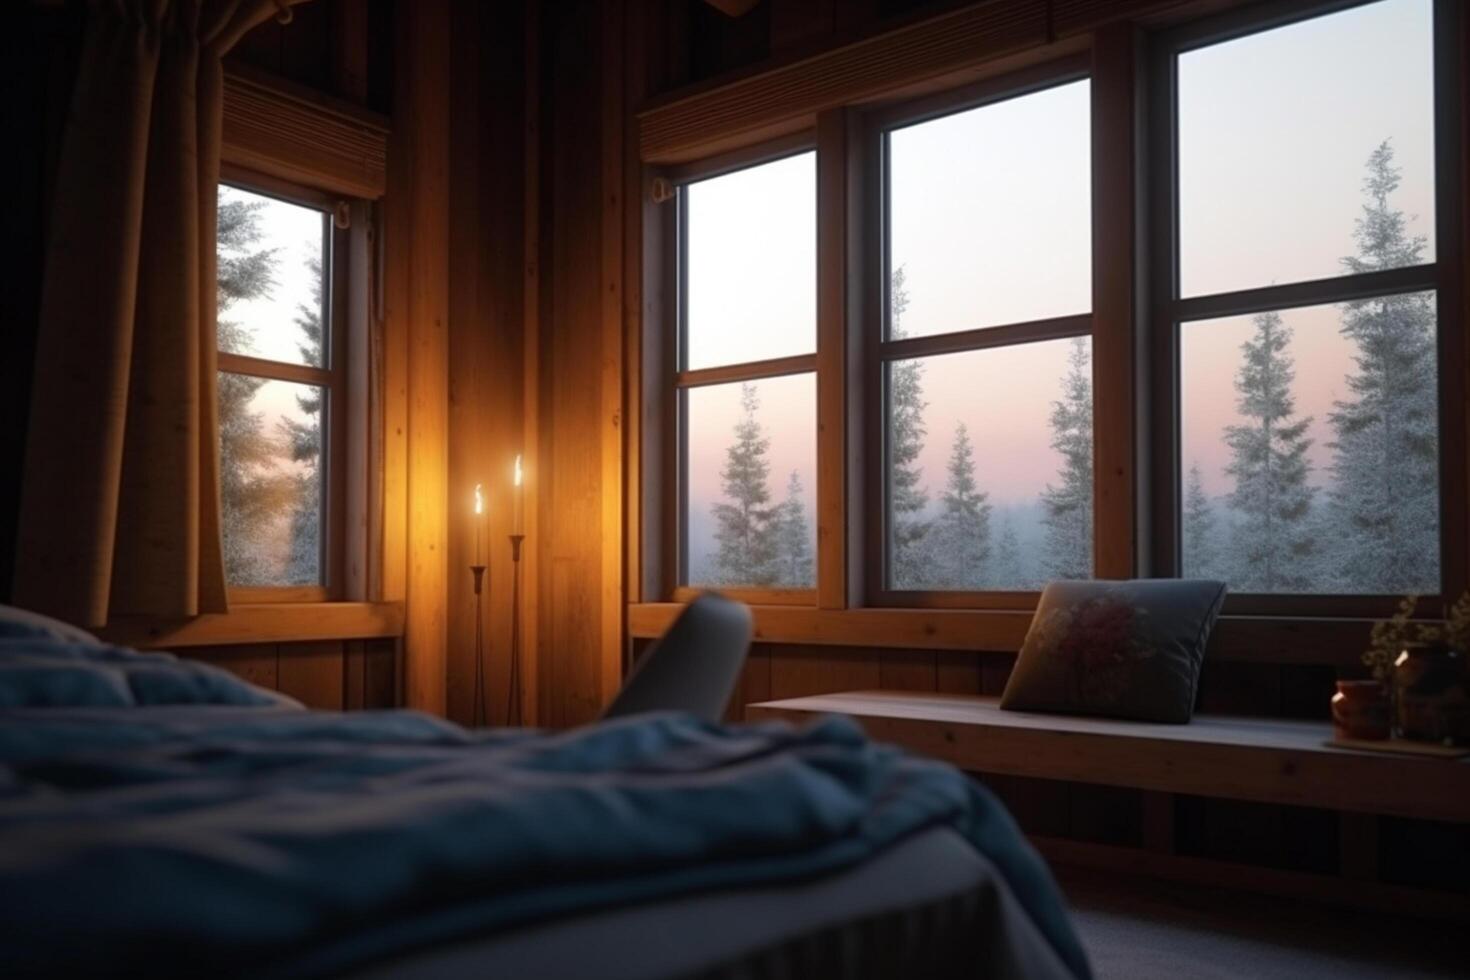 Morning View from Modern Wooden Cabin Hotel Room Overlooking Forested Mountains photo